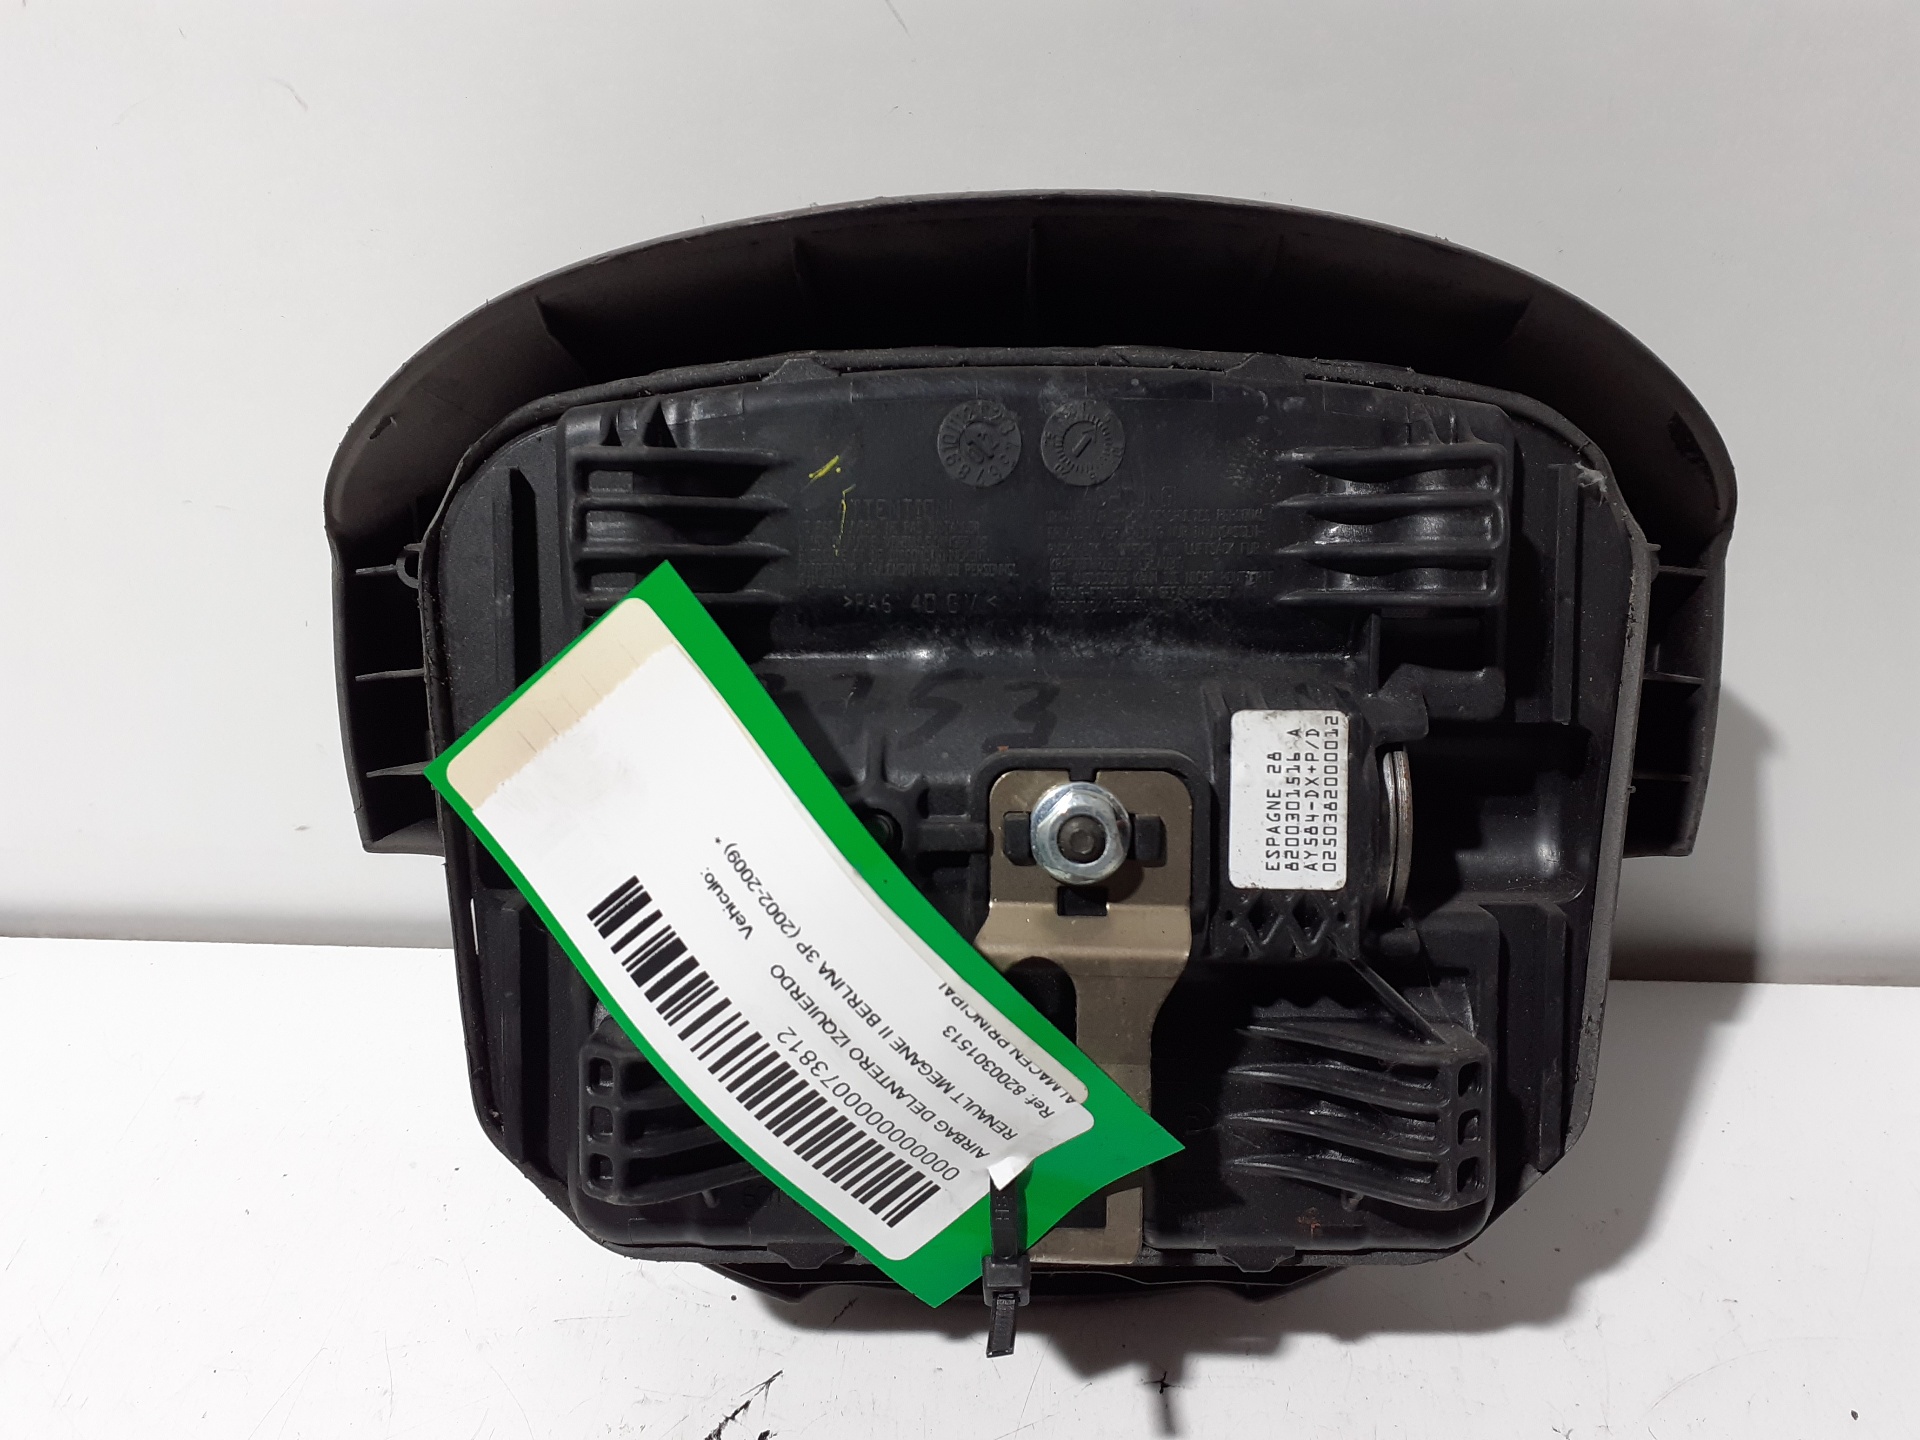 RENAULT Megane 2 generation (2002-2012) Other Control Units 8200301516A, 8200301516A 20850842